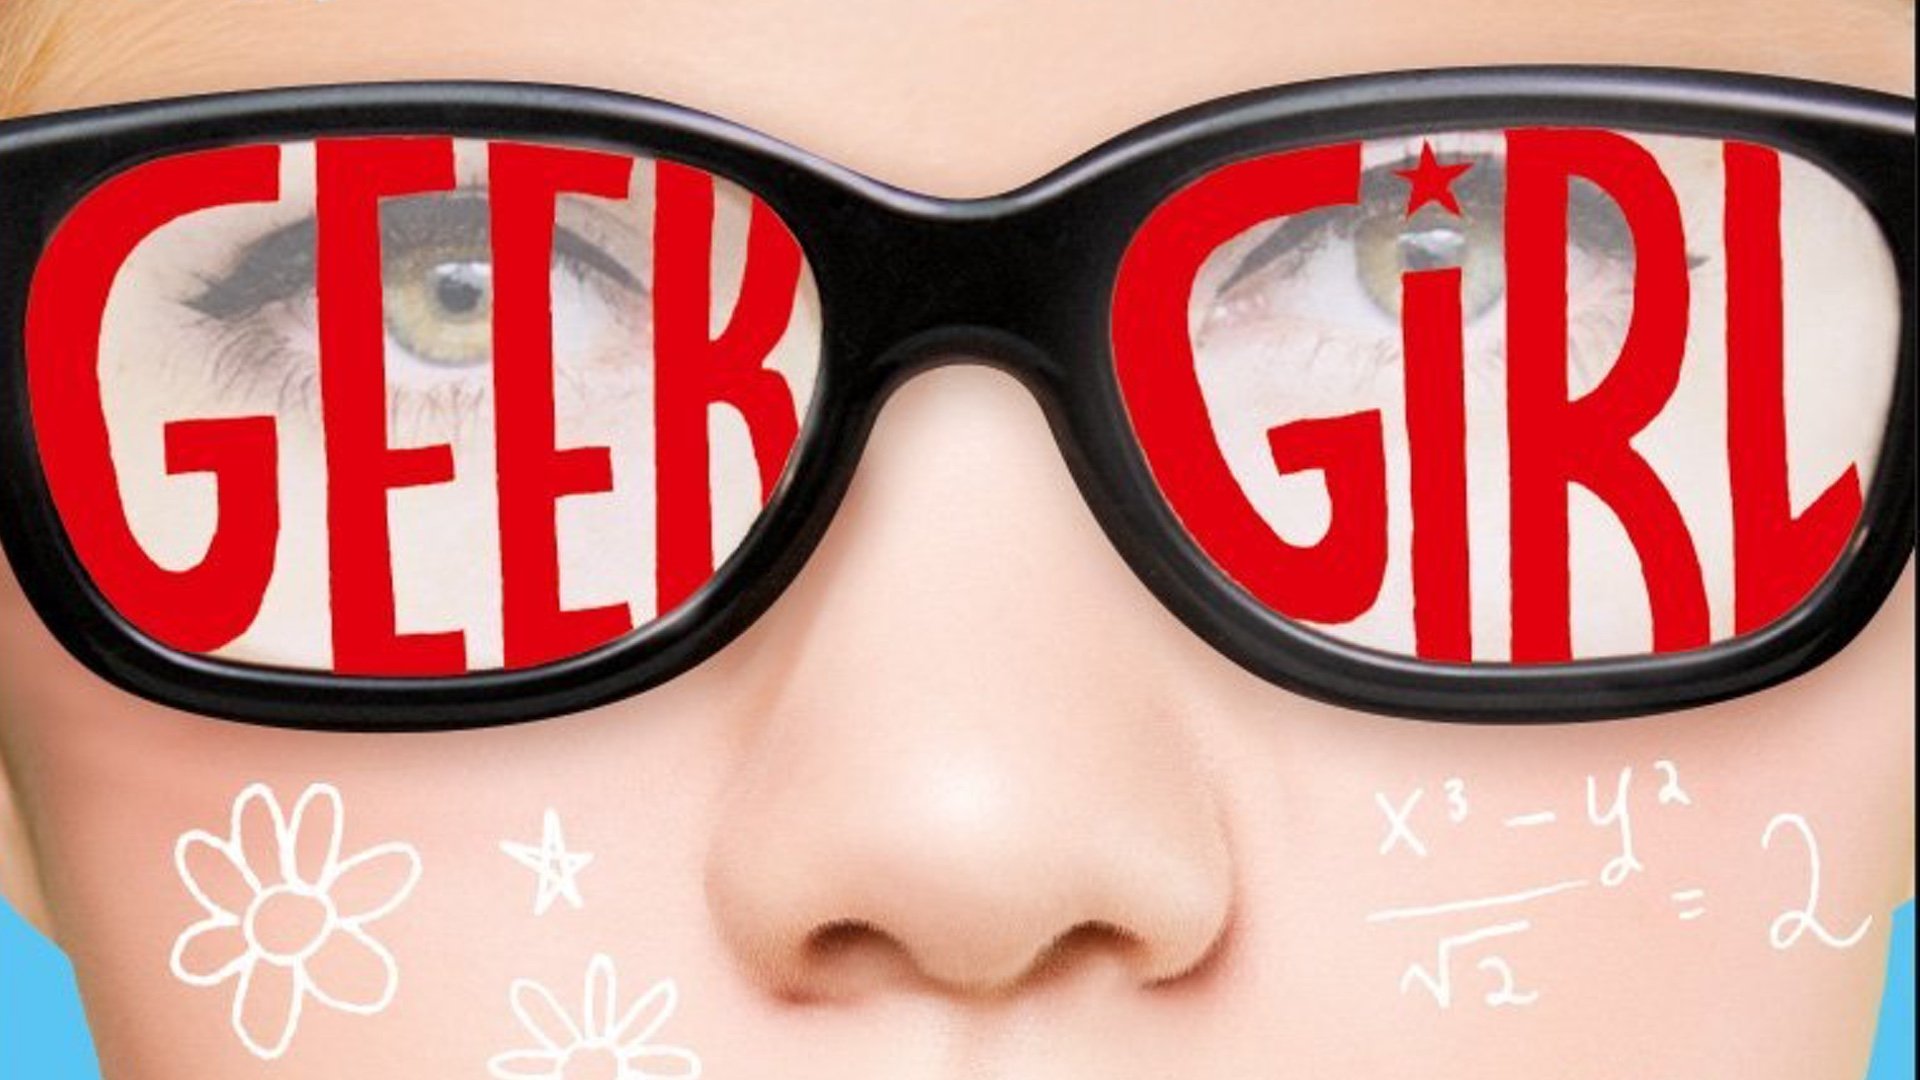 Netflix Developing Series Adaptation of GEEK GIRL About an Awkward Teen Girl  Who is Thrust Into The World of Modeling — GeekTyrant